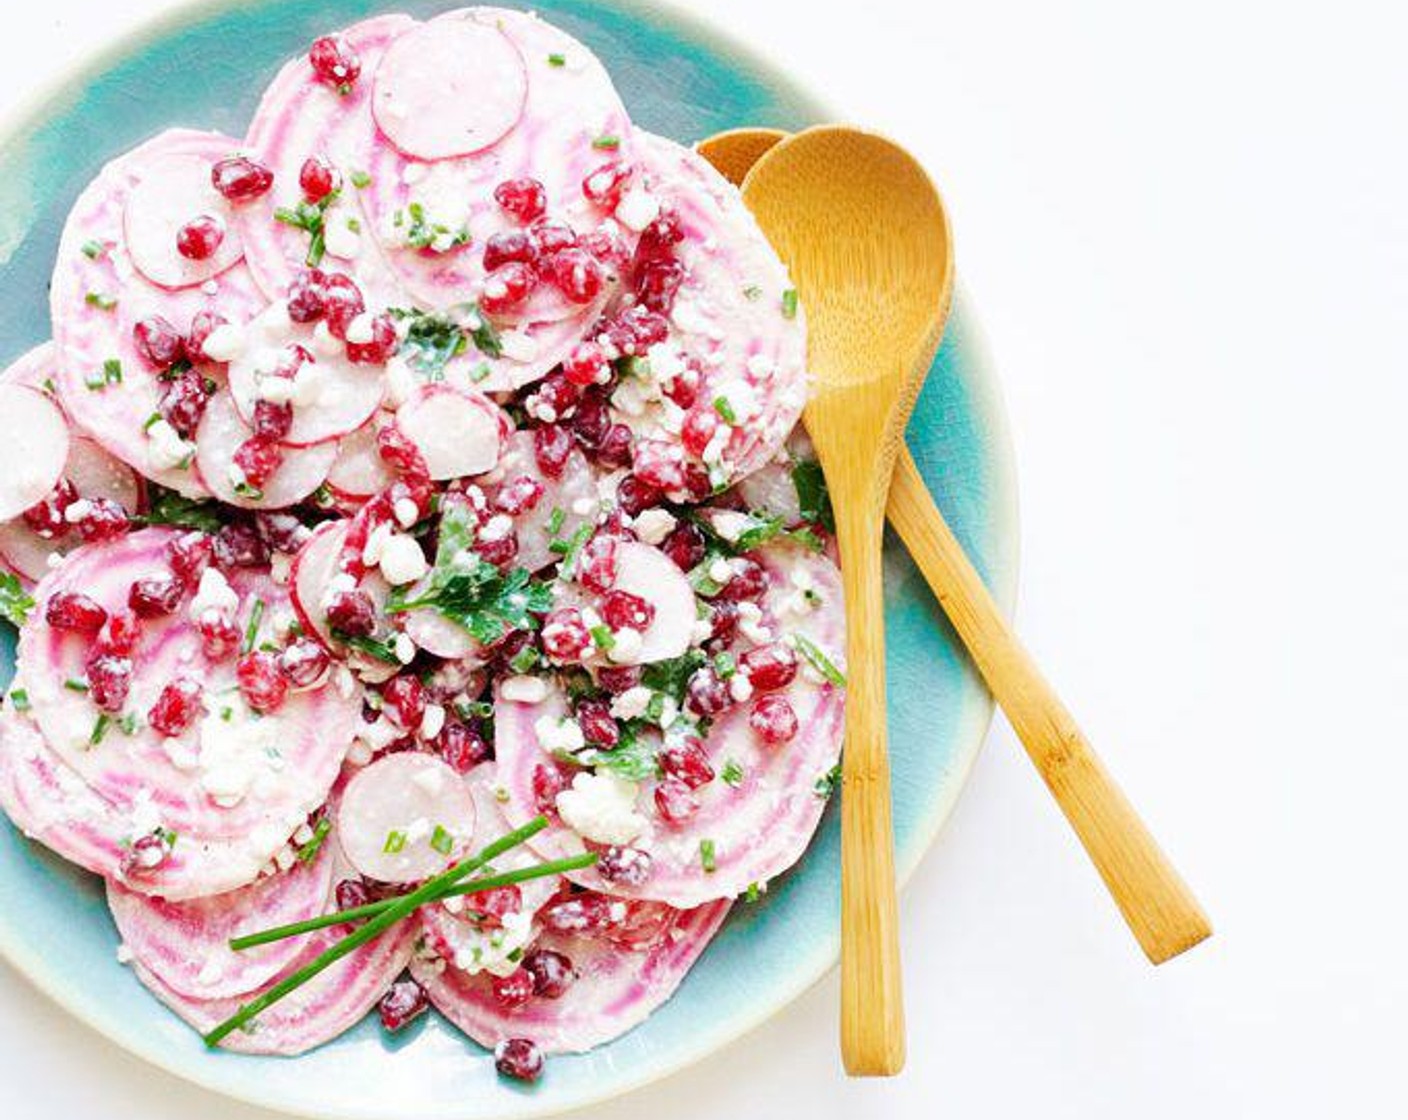 step 2 Gently toss beet, radishes, herbs, Cottage Cheese (1/4 cup), Pomegranate (1/2 cup) and Red Wine Vinegar (1/2 tsp) together all ingredients in a large bowl, seasoning with Ground Black Pepper (to taste).